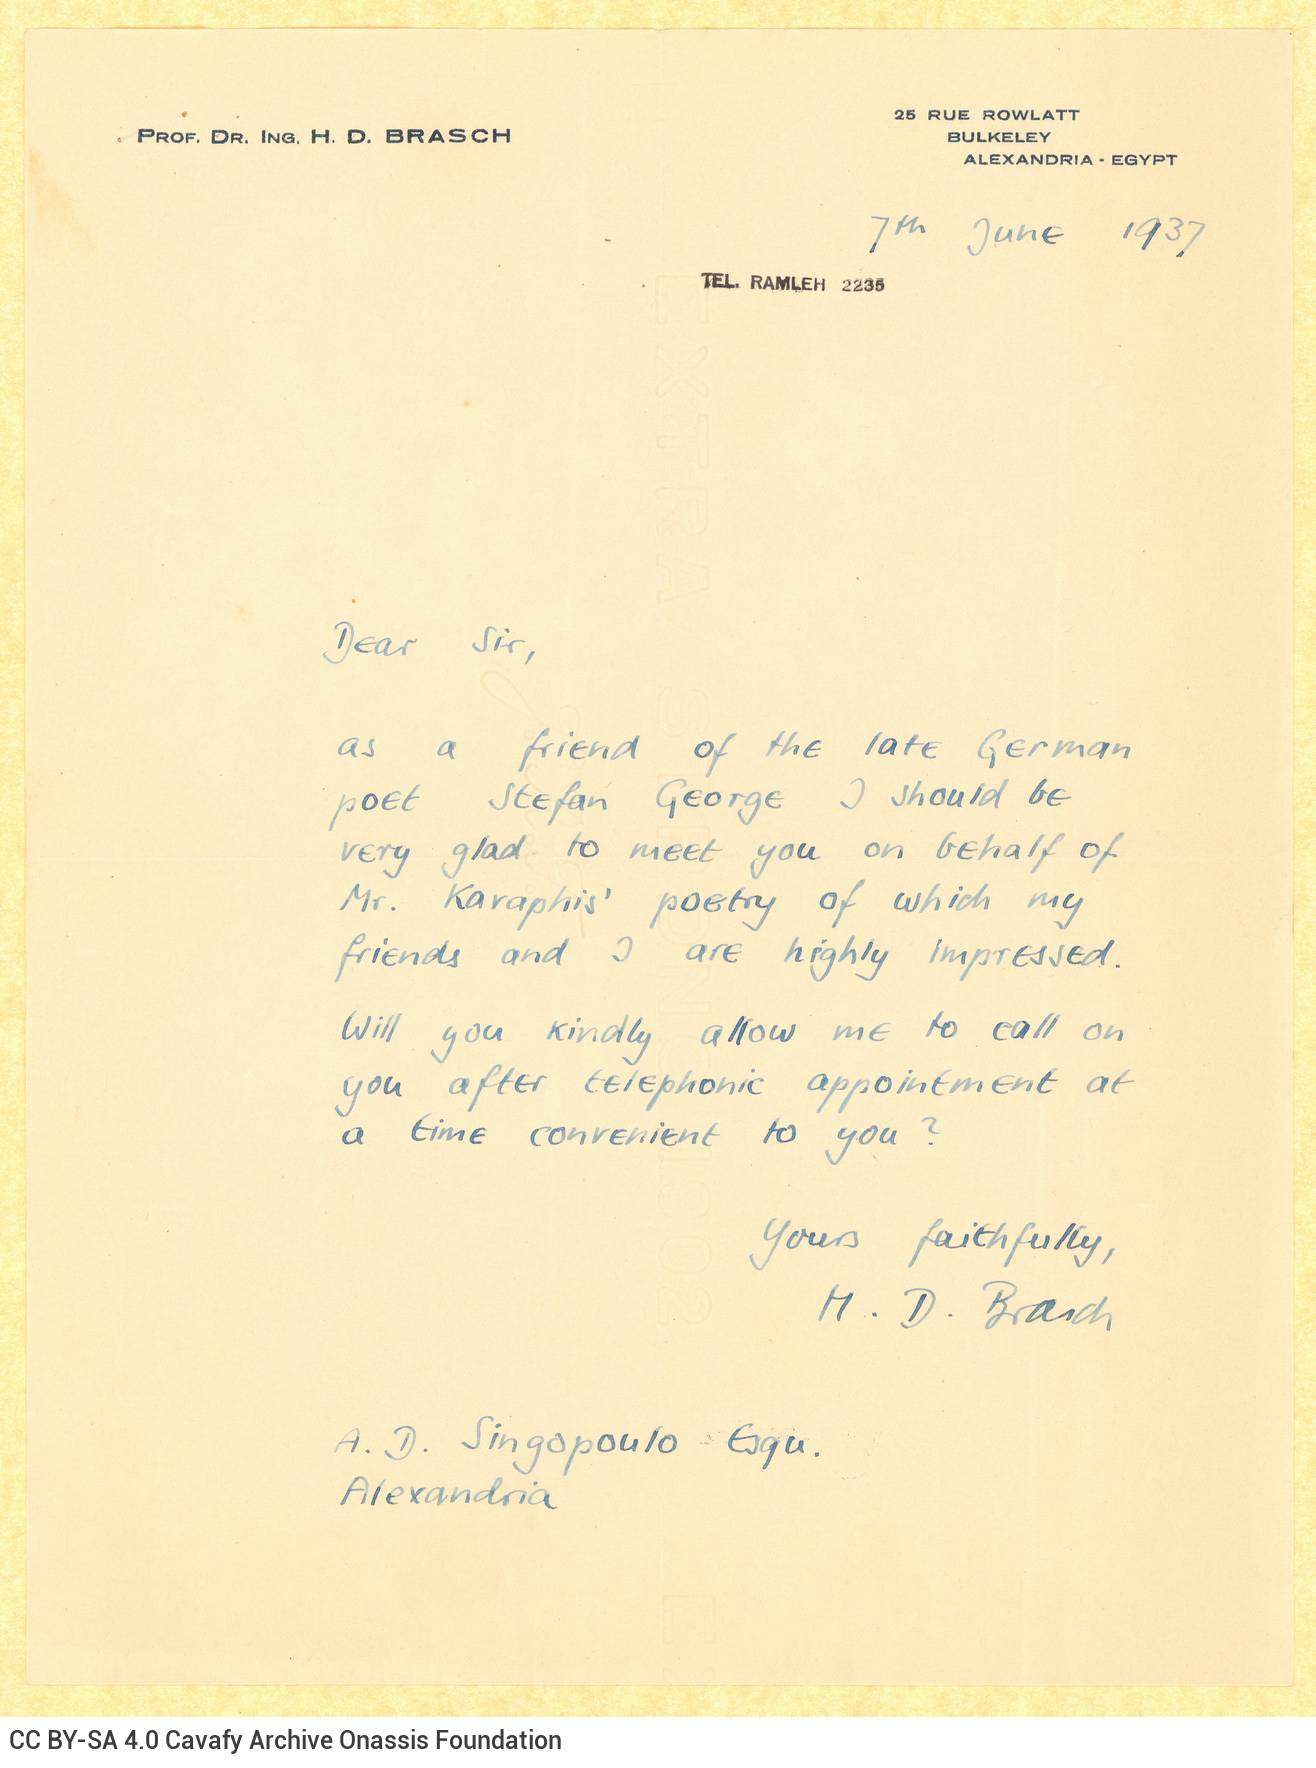 Handwritten letter by professor H. D. Brasch to Alekos Singopoulo on one side of a letterhead with the sender's name and addr